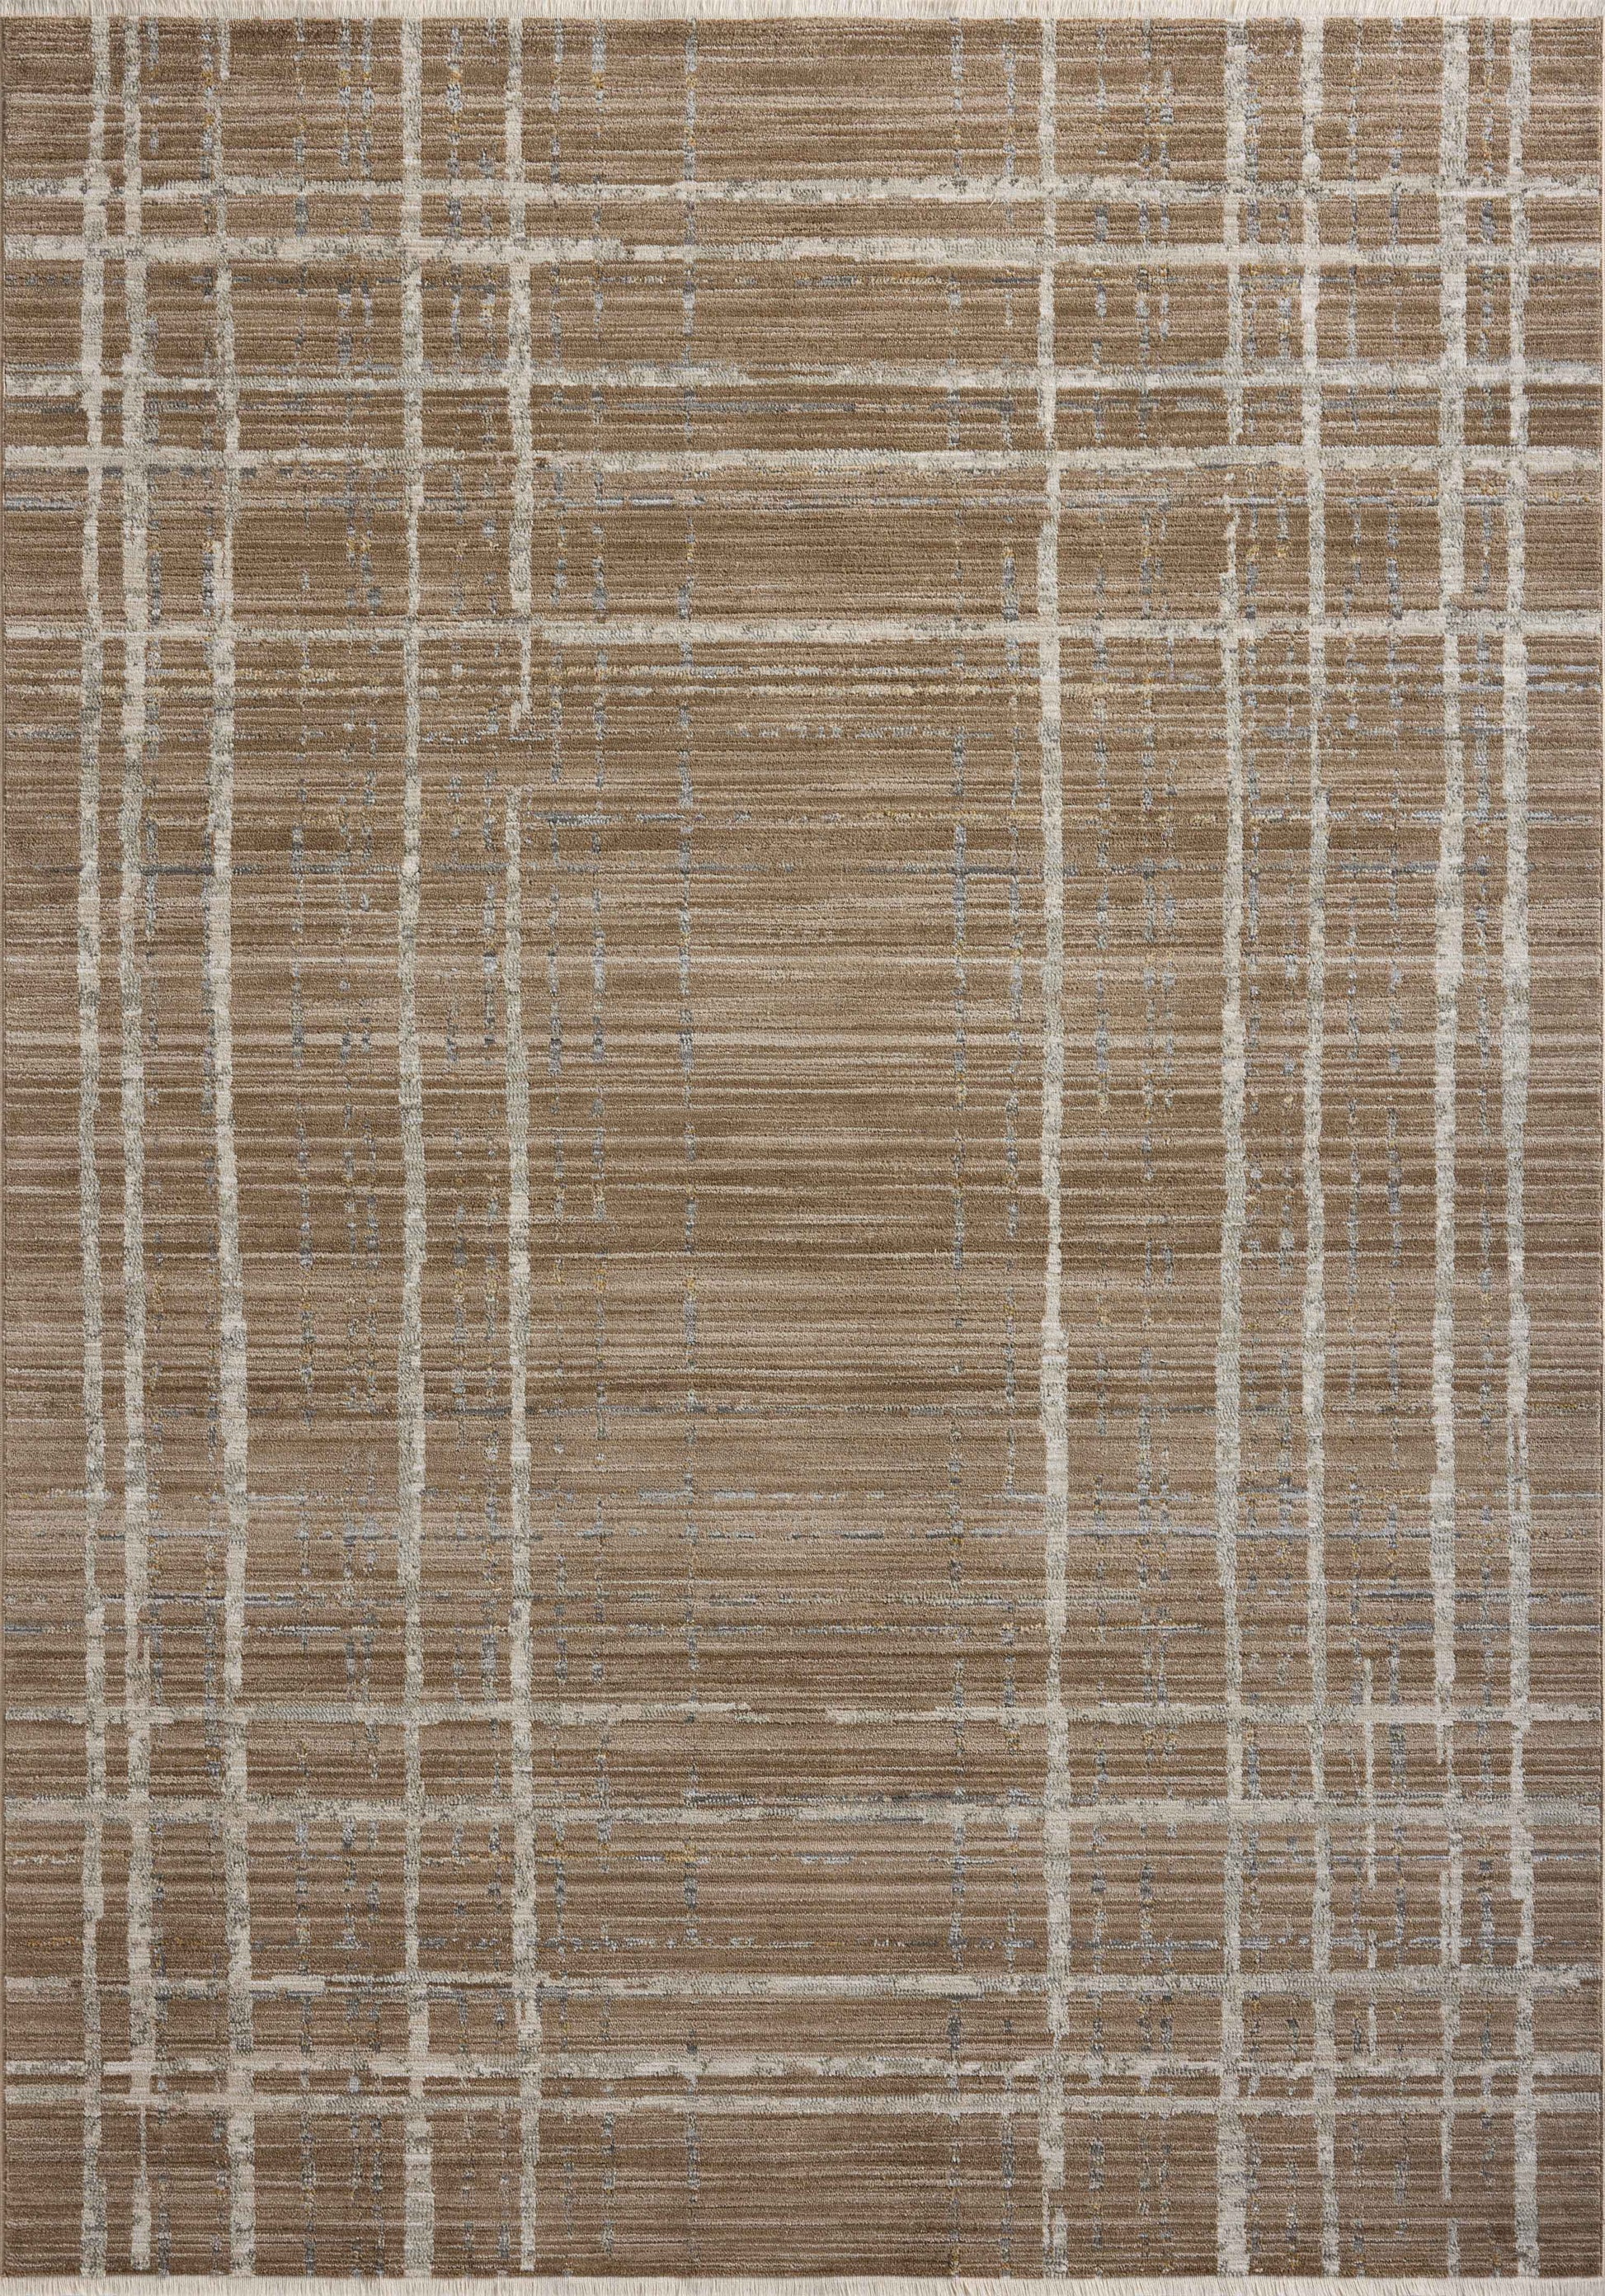 A picture of Loloi's Wade rug, in style WAE-05, color Brown / Stone